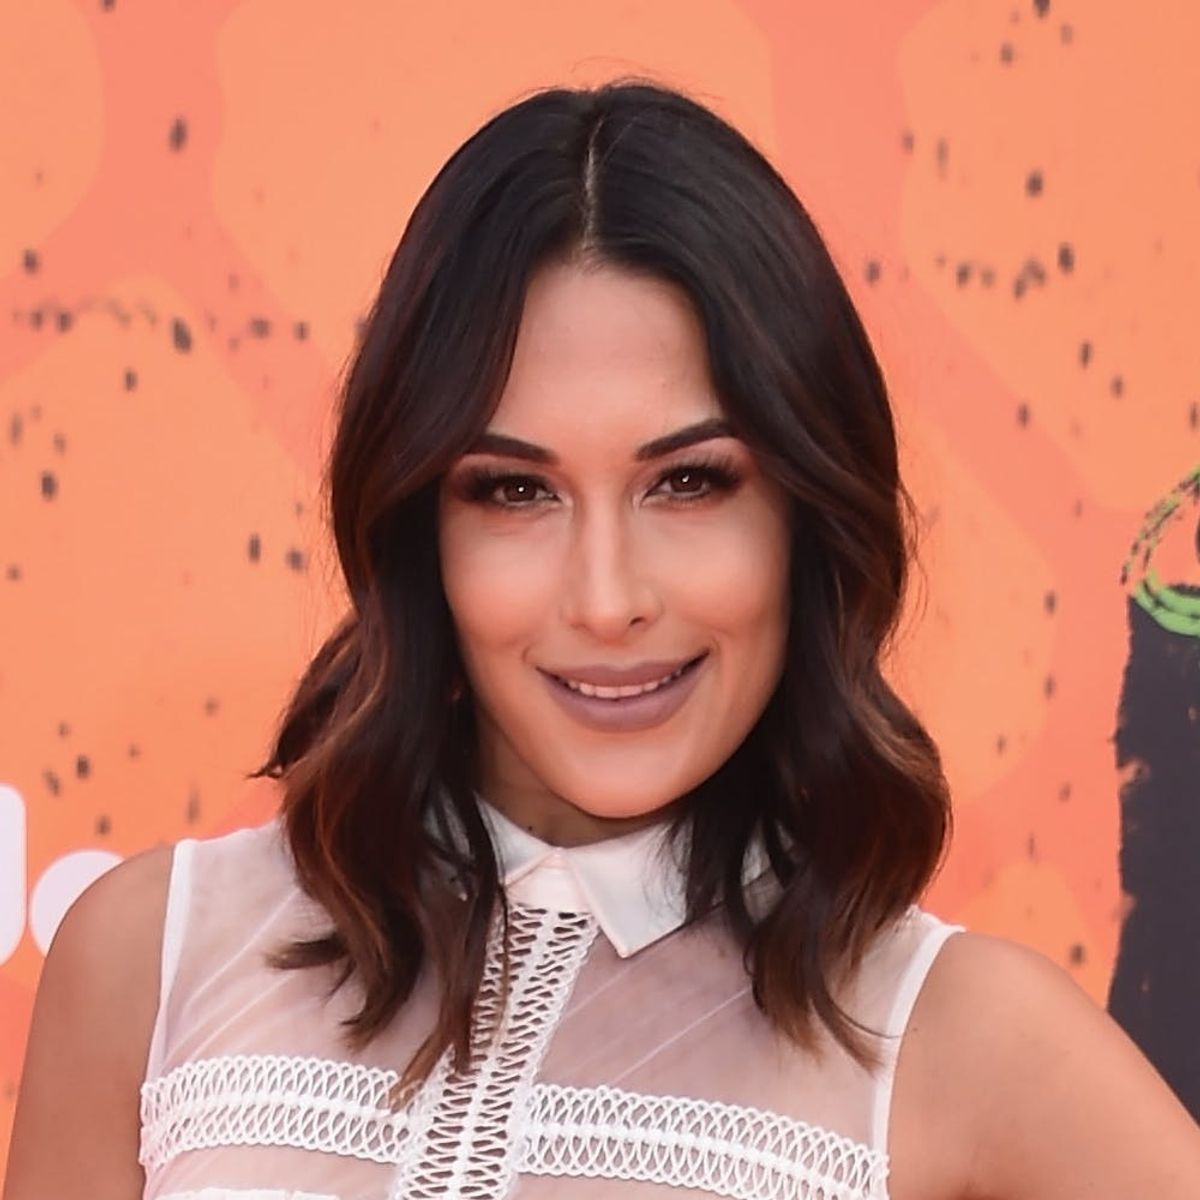 Brie Bella Shares Her First Family Photo With Baby Birdie